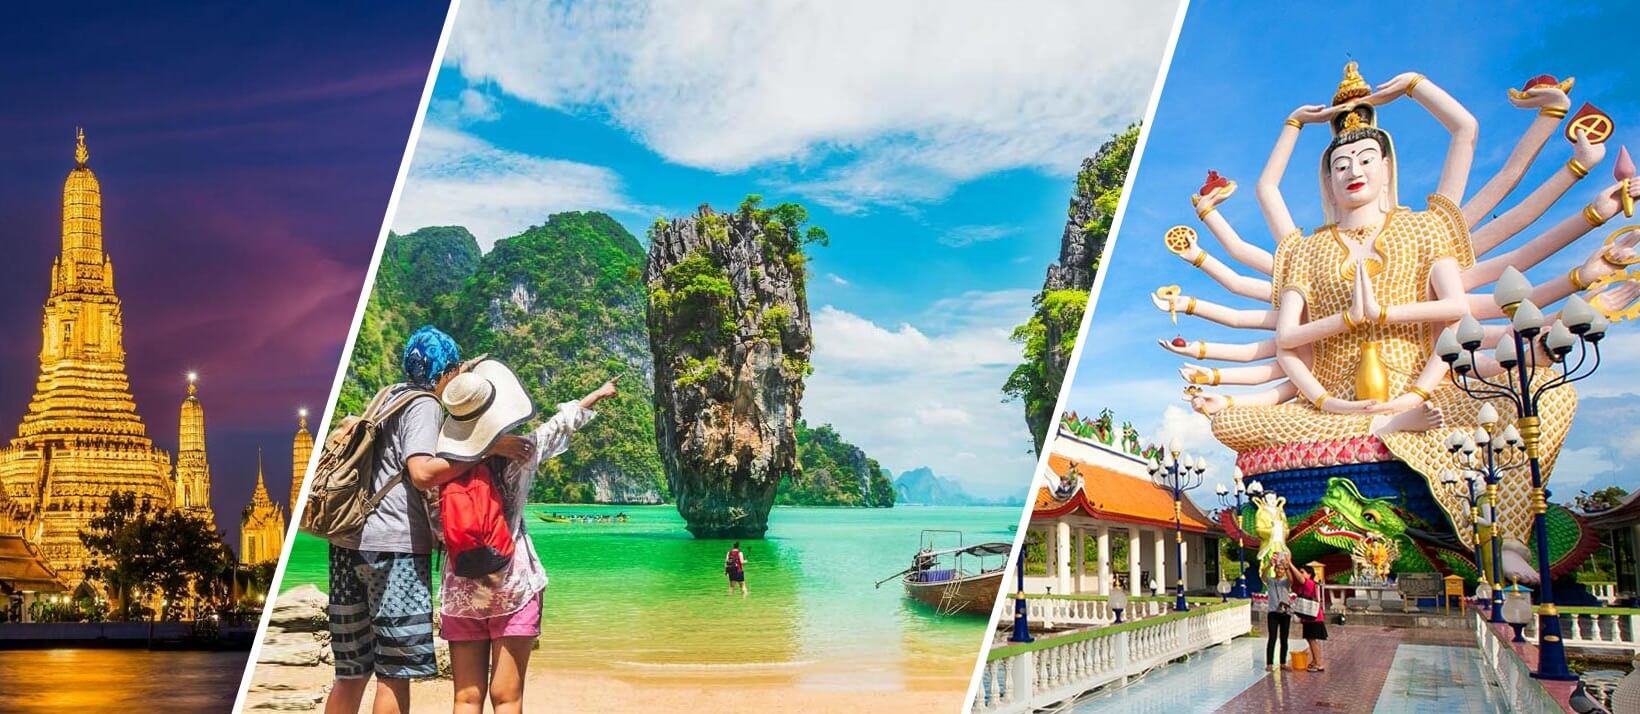 Thailand Holiday Tour Packages